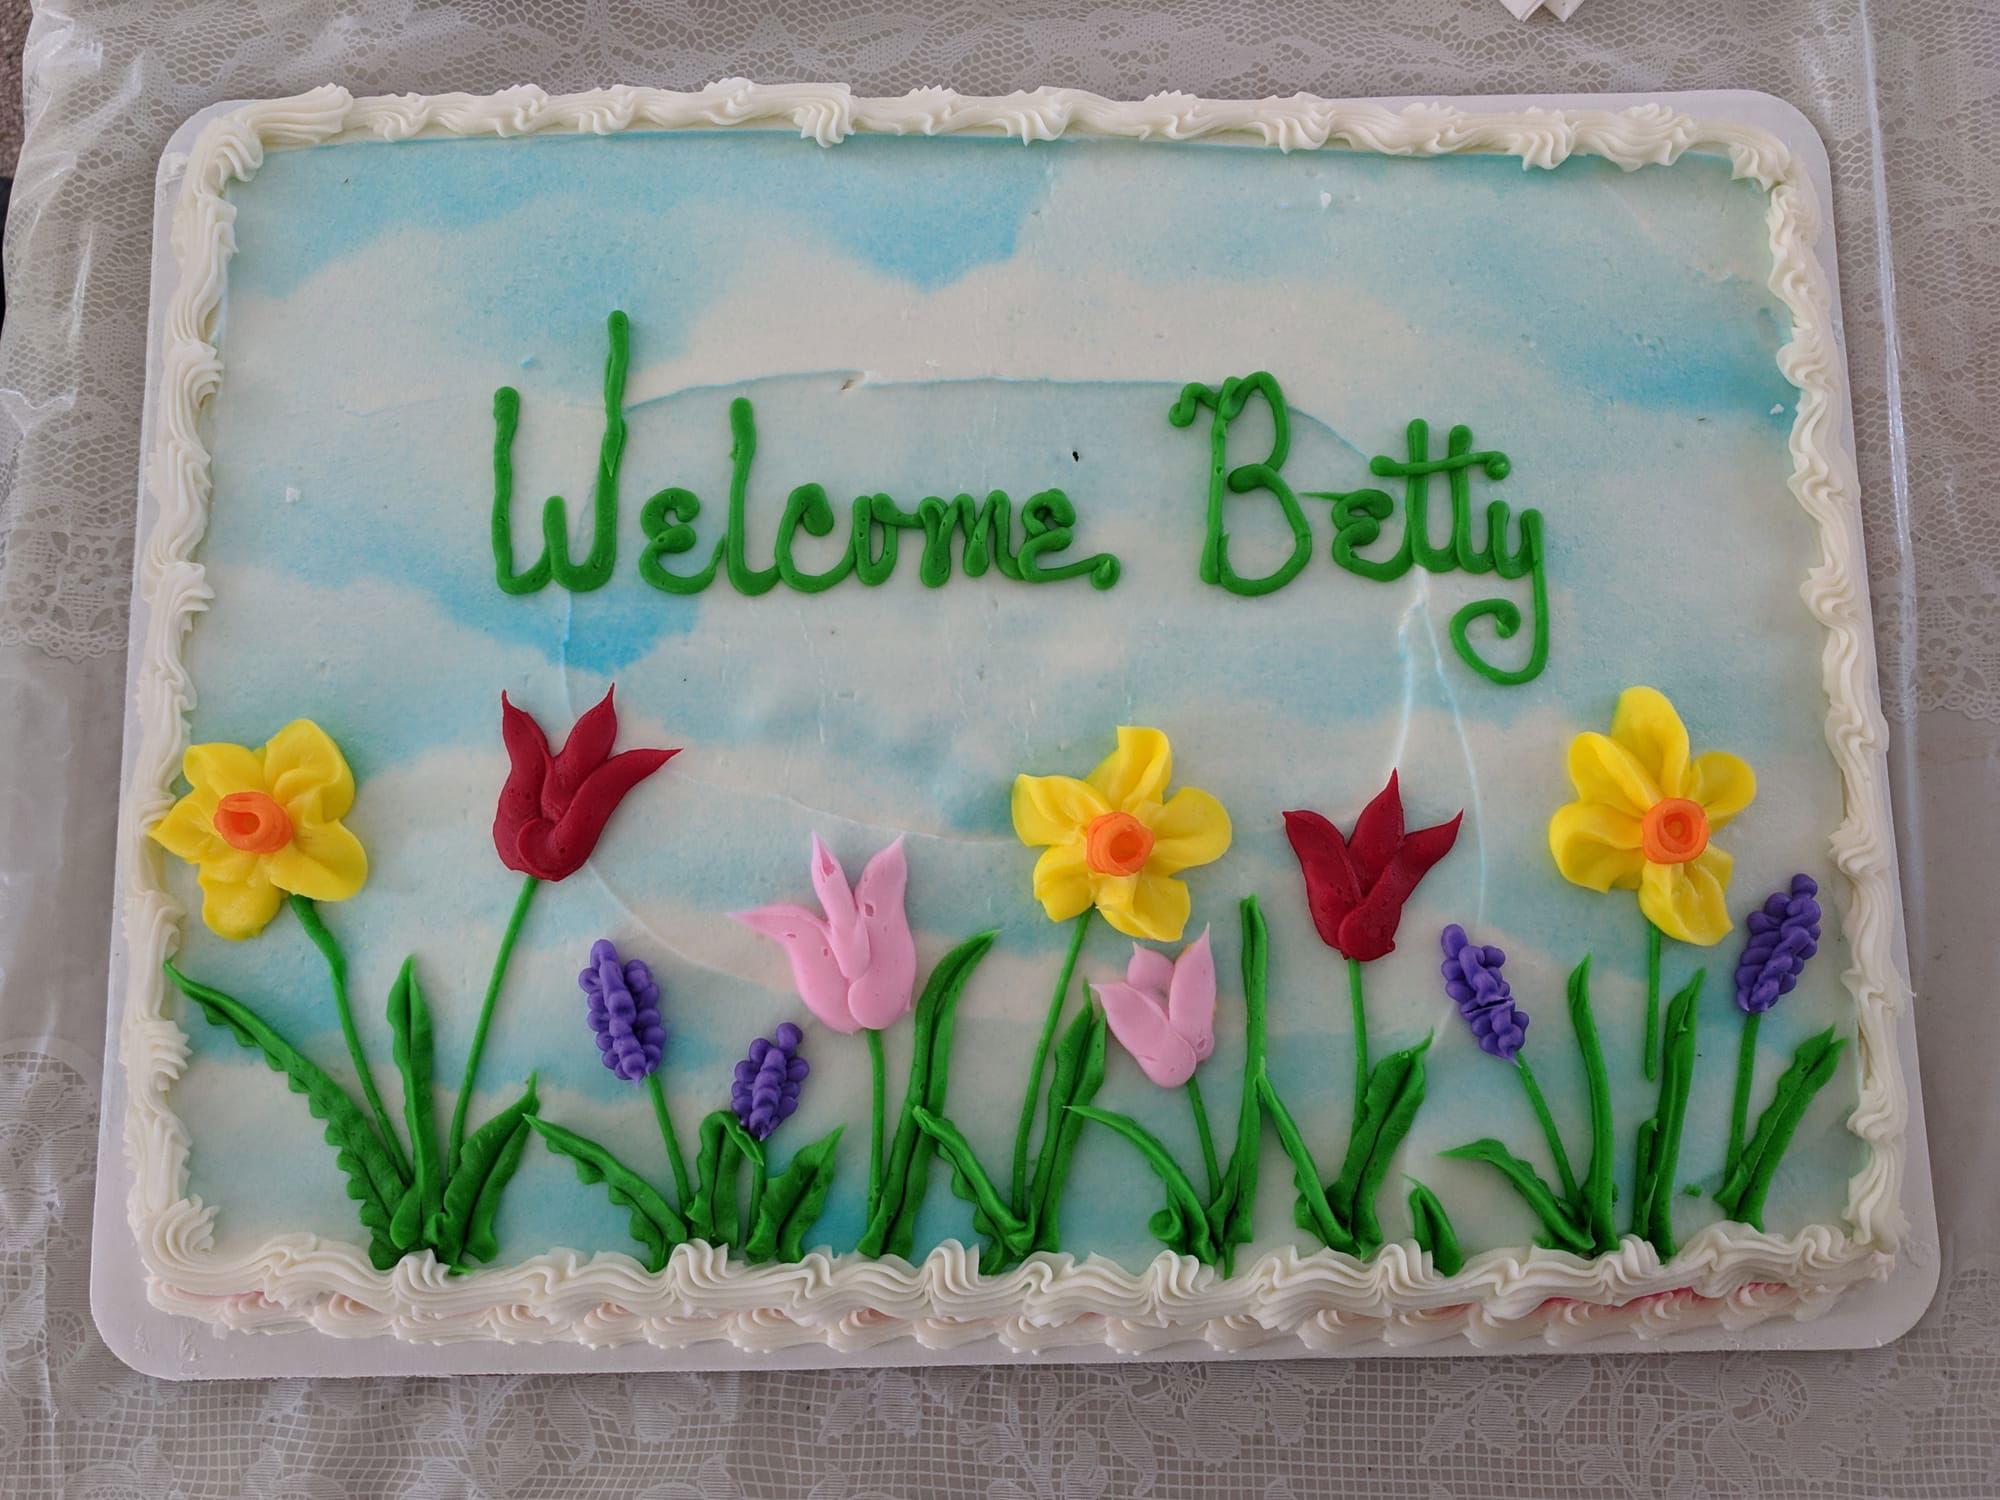 "Welcome, Betty!"